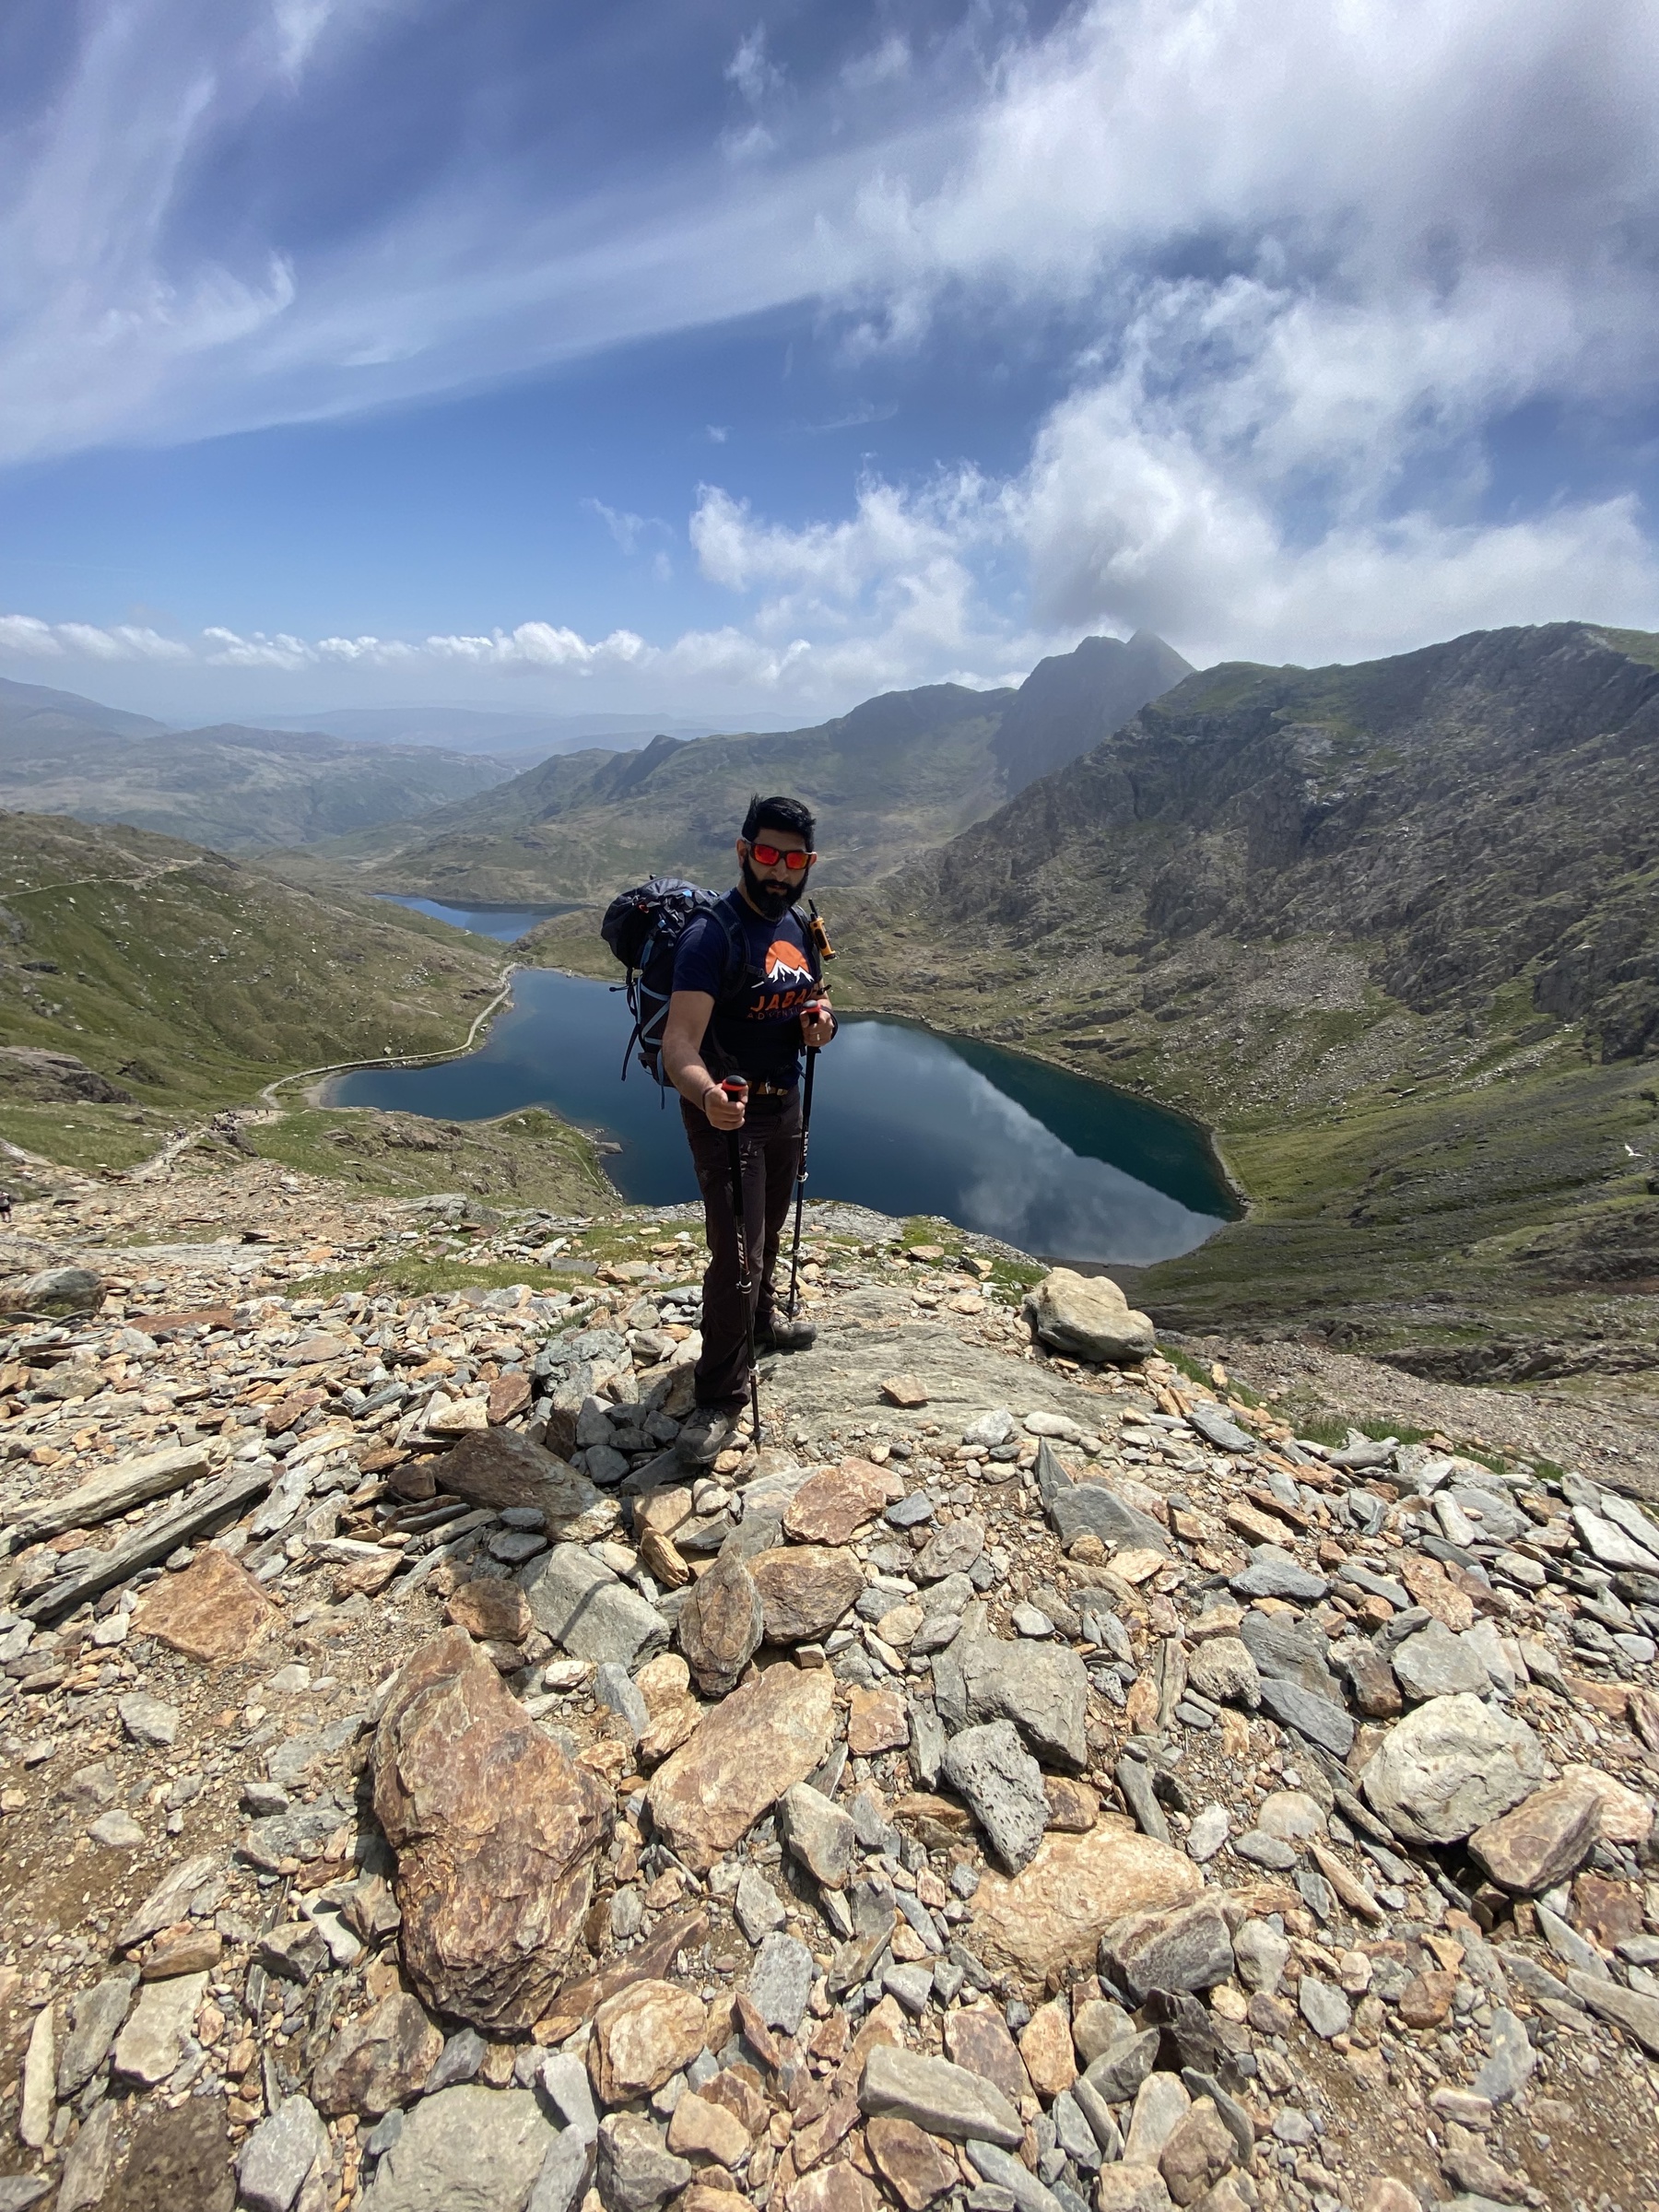 Mahroof is stood on a rock pile on top of a mountain. There’re mountains surrounding a lake behind him, beneath a blue sky. Mahroof has his walking poles, backpack and sunglasses.